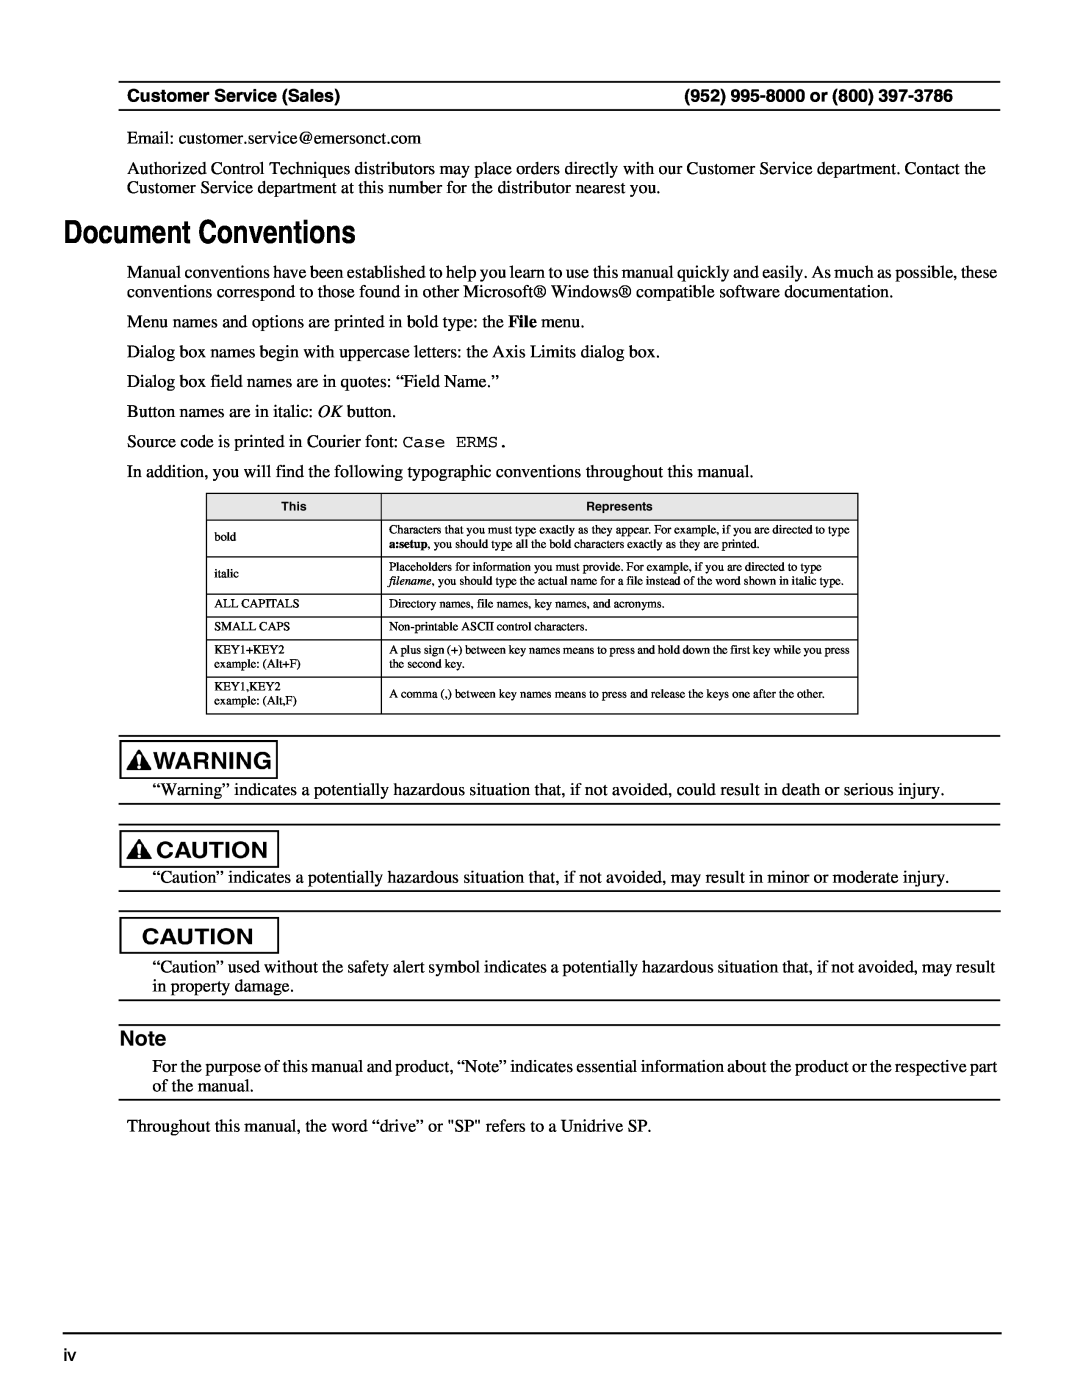 Emerson P/N 400361-00 manual Document Conventions 